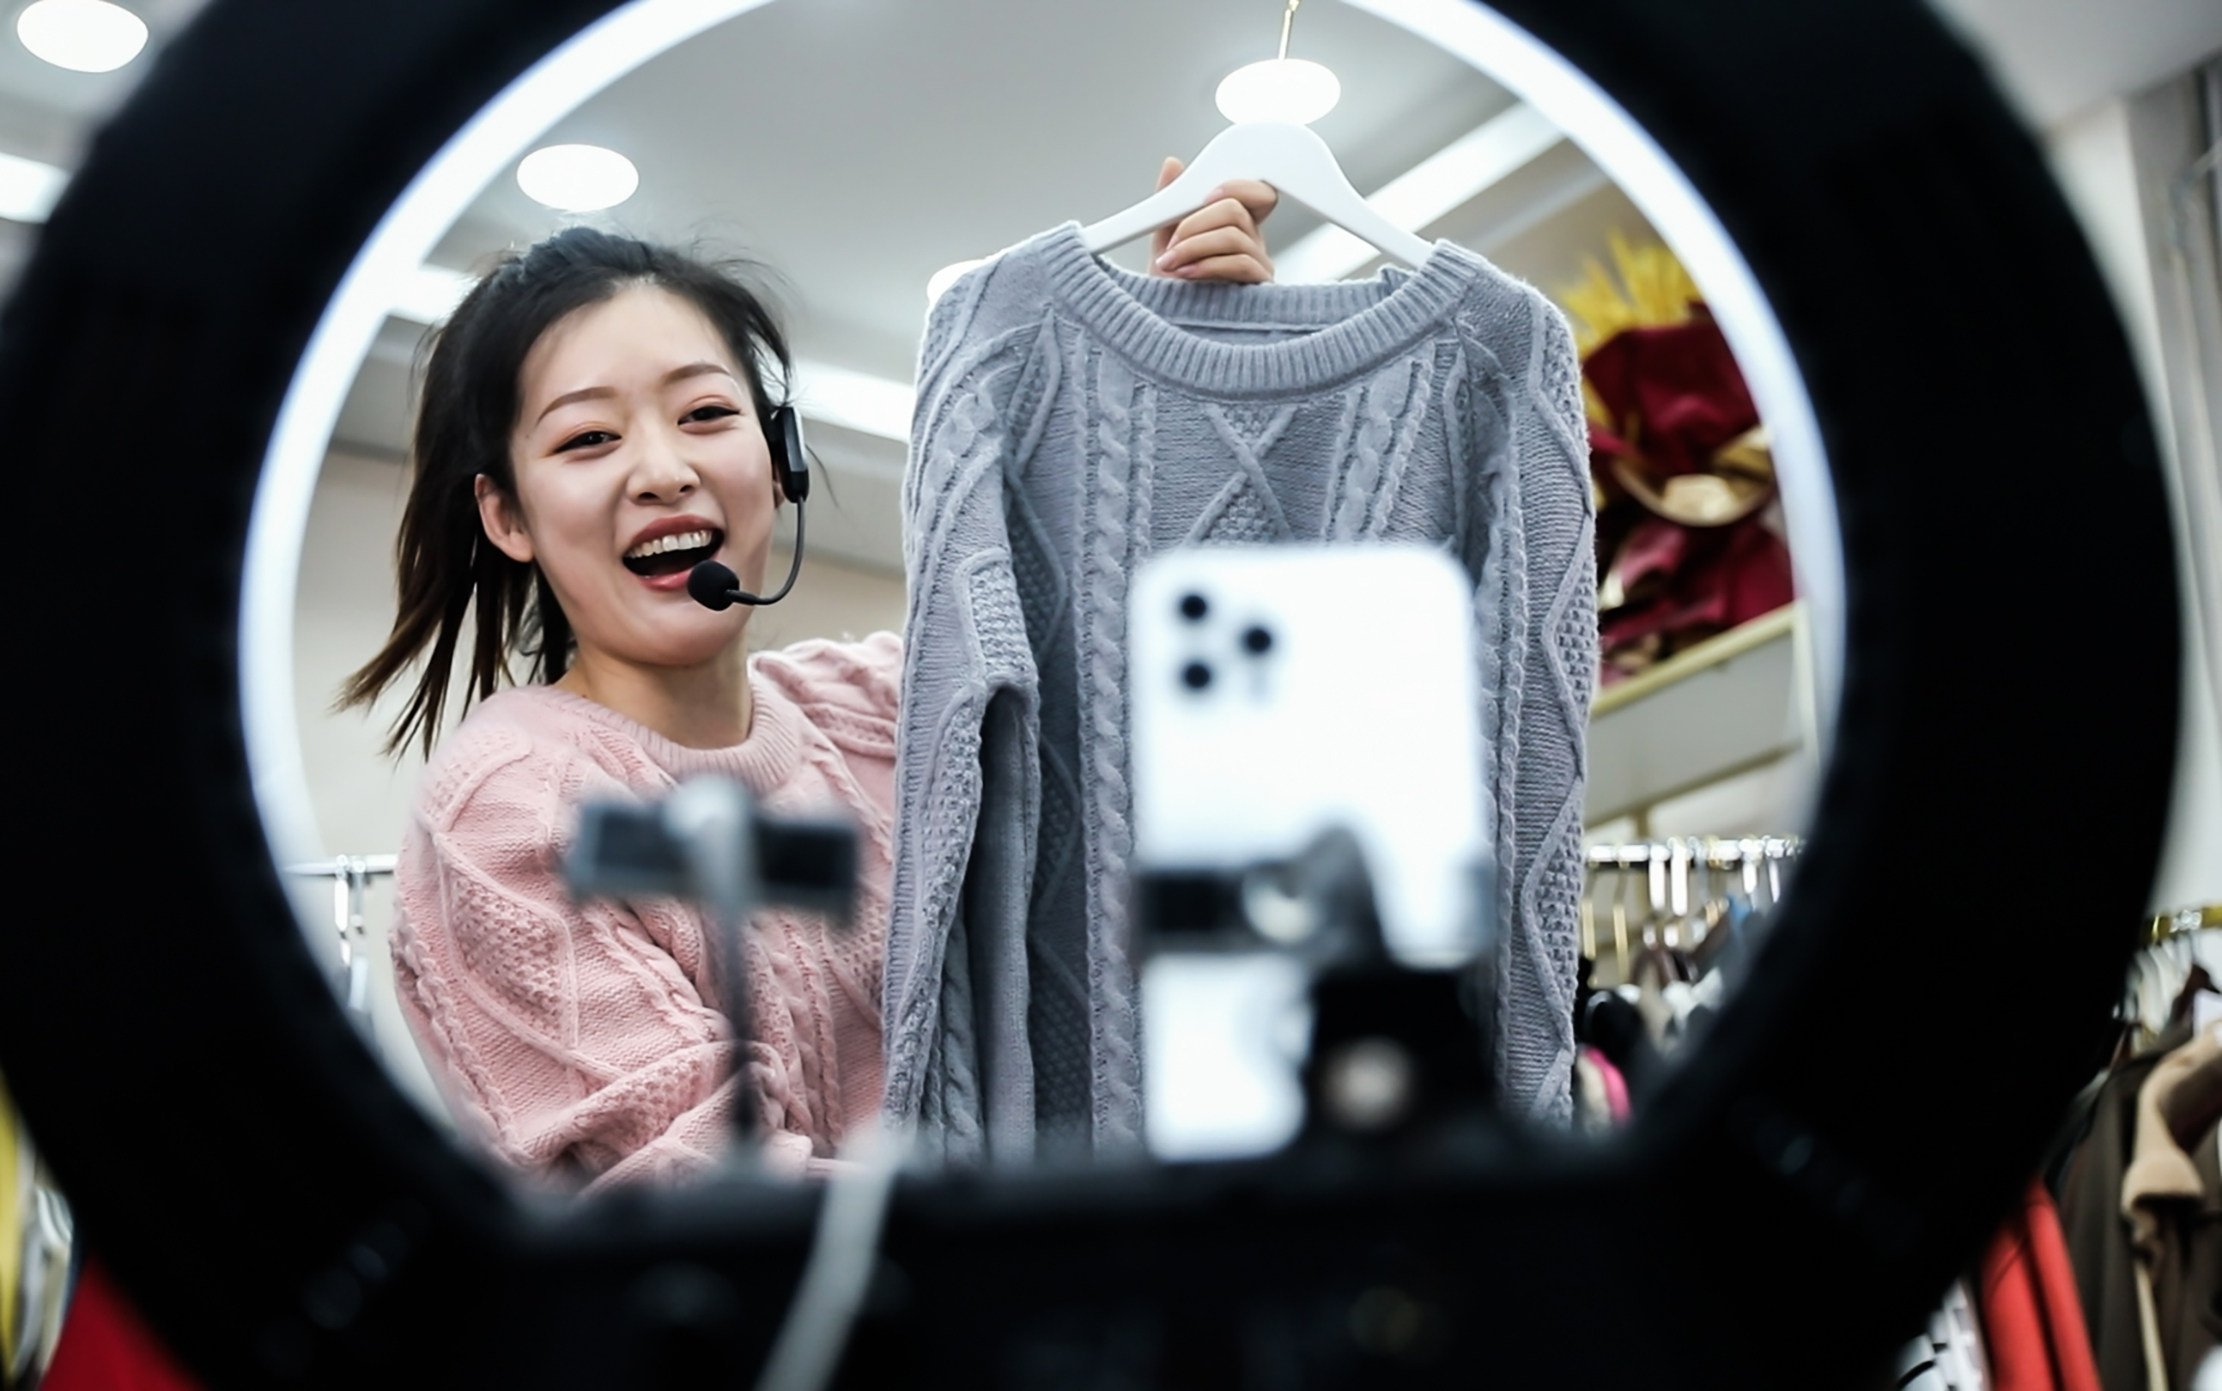 A People’s Daily opinion piece has called for tighter control of China’s live-streaming e-commerce industry. Photo: VCG via Getty Images